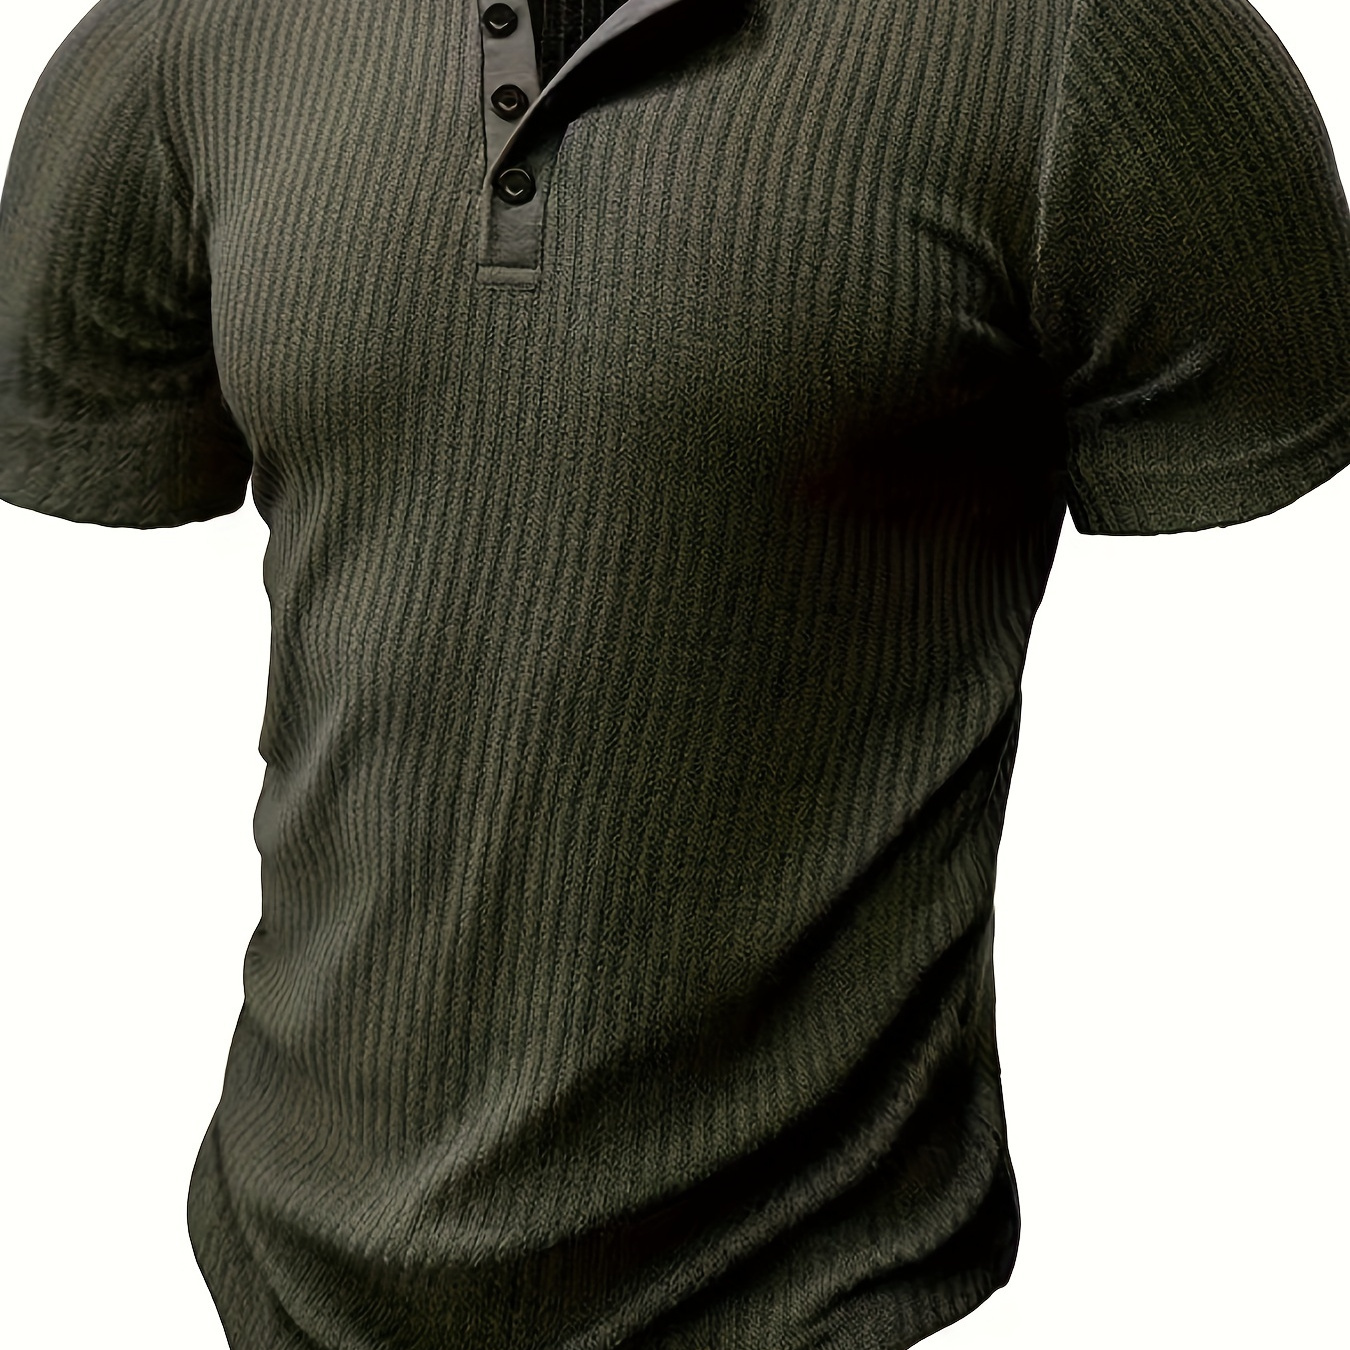 

Men's Solid Stripe Pattern Knit Short Sleeve Henley Shirt, Casual And Chic For Summer Leisurewear And Outdoors Activities